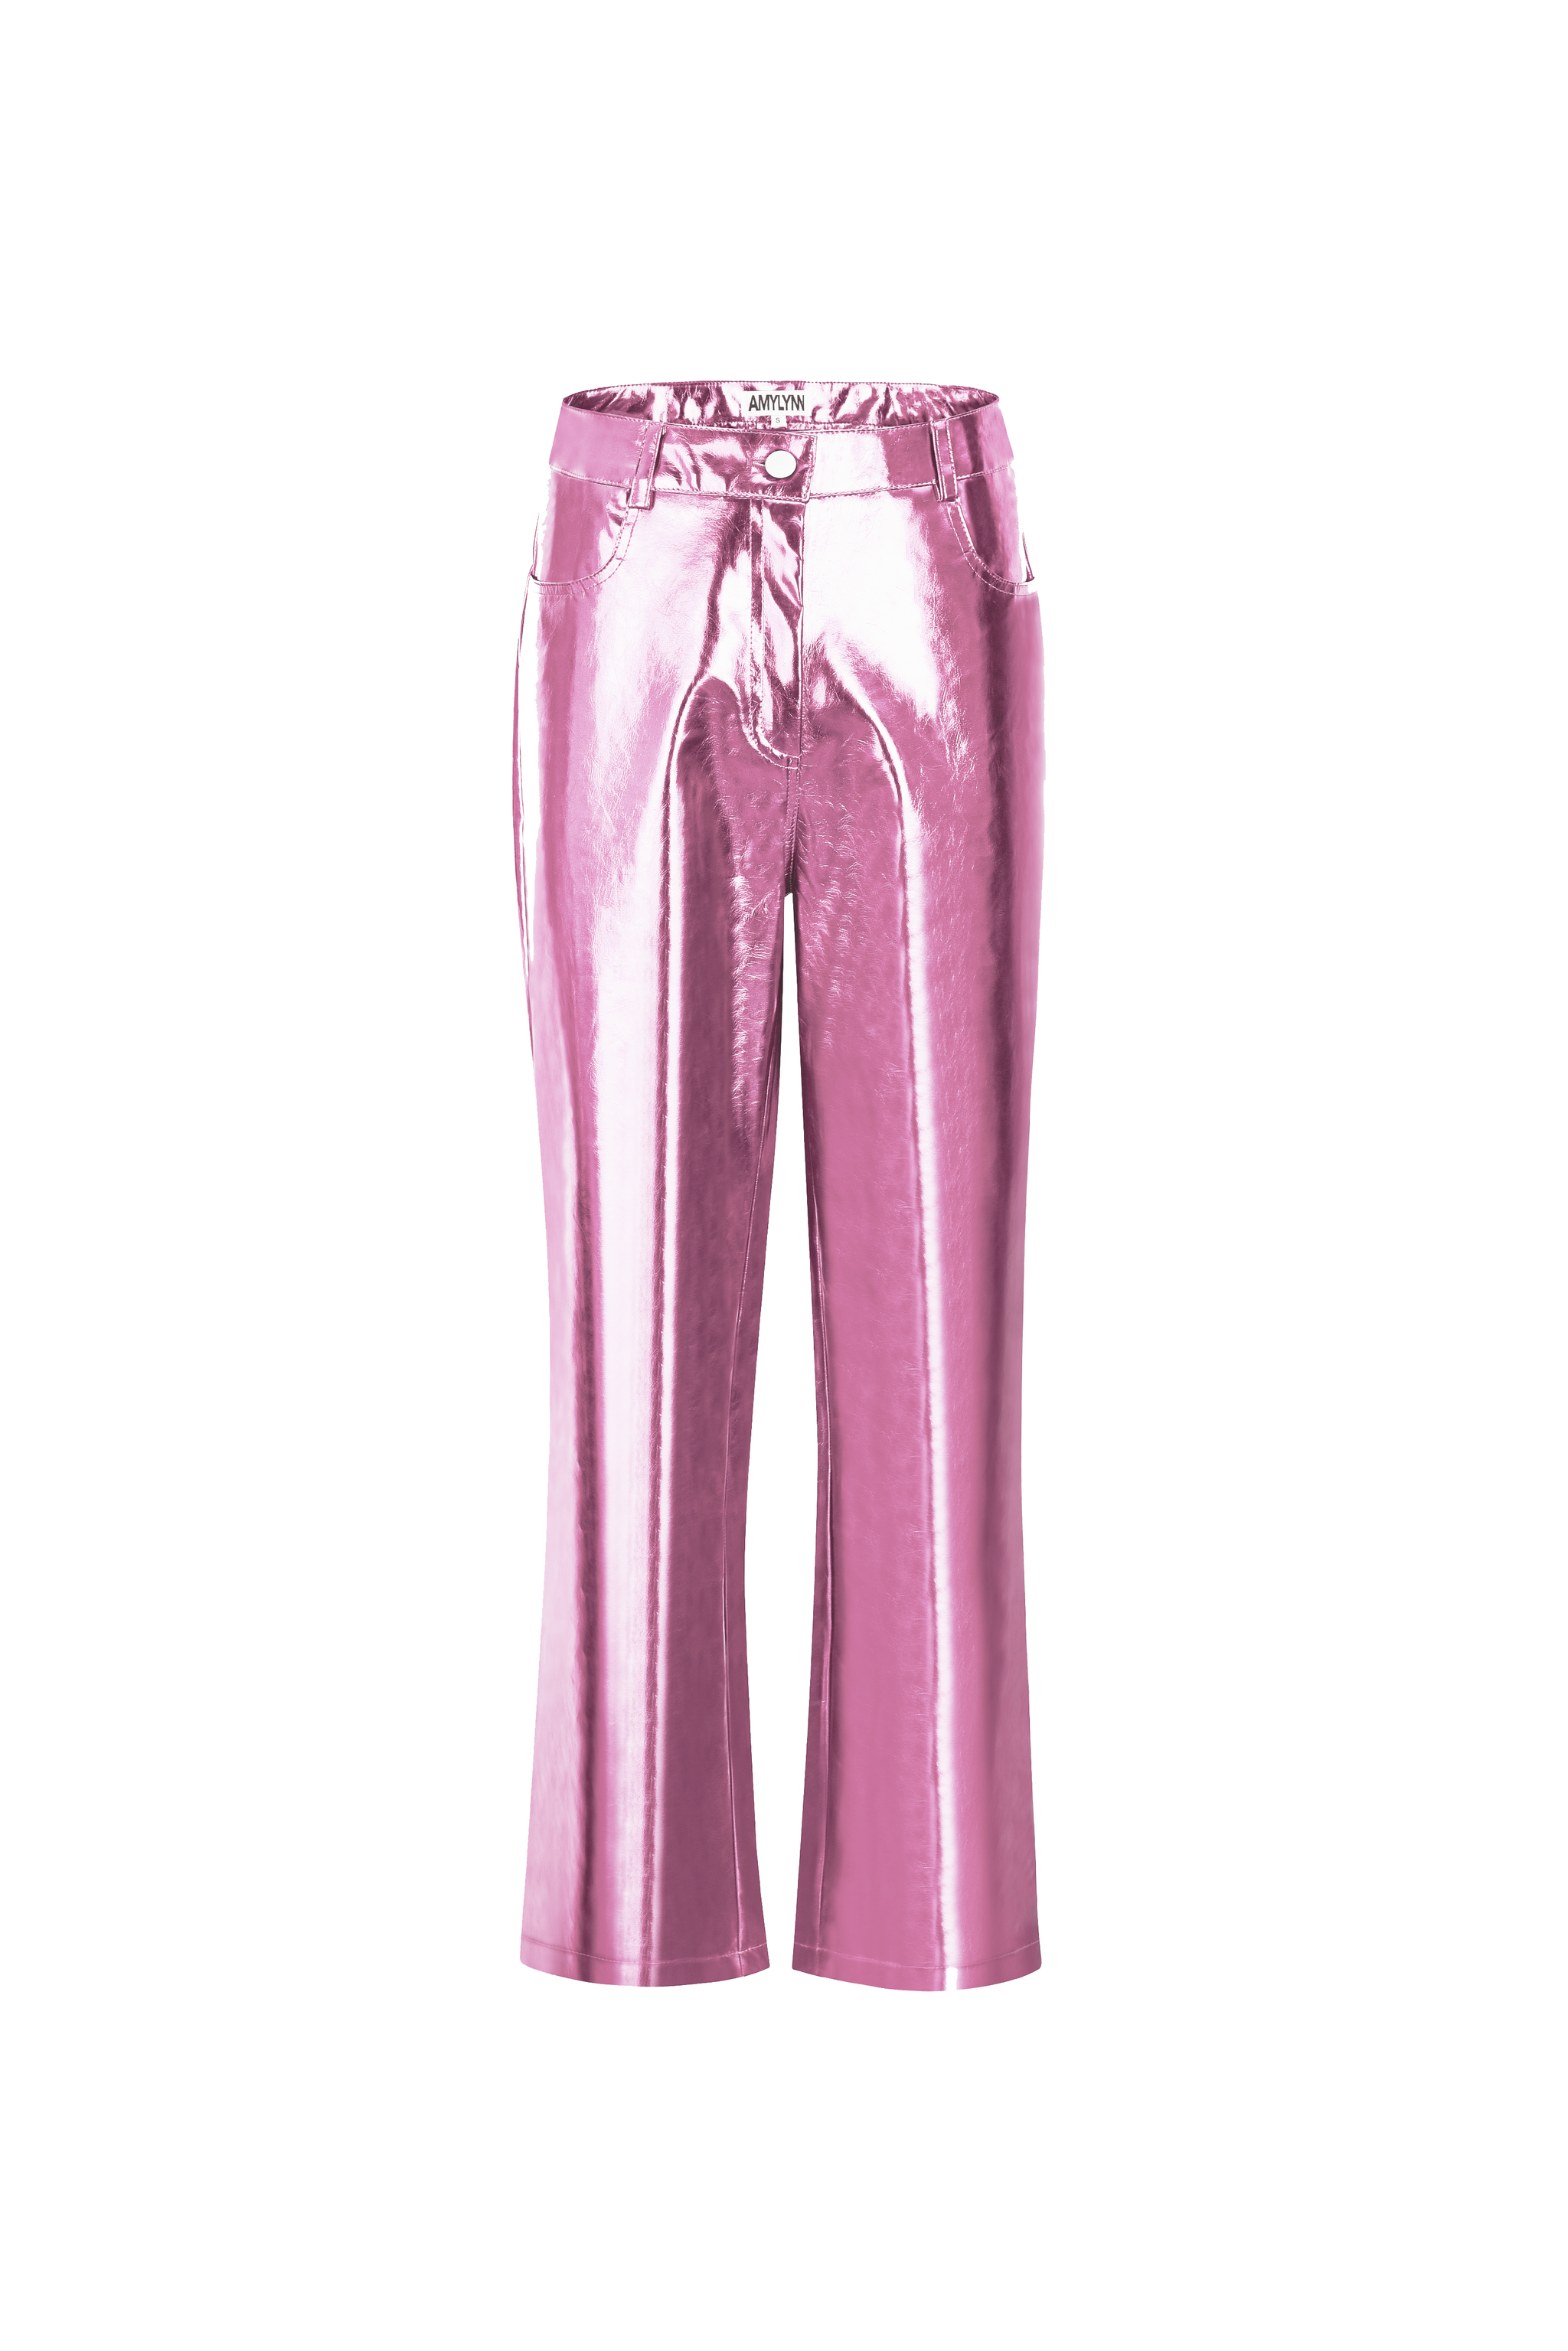 Lupe Light Pink Metallic Straight Leg High Rise Faux Leather